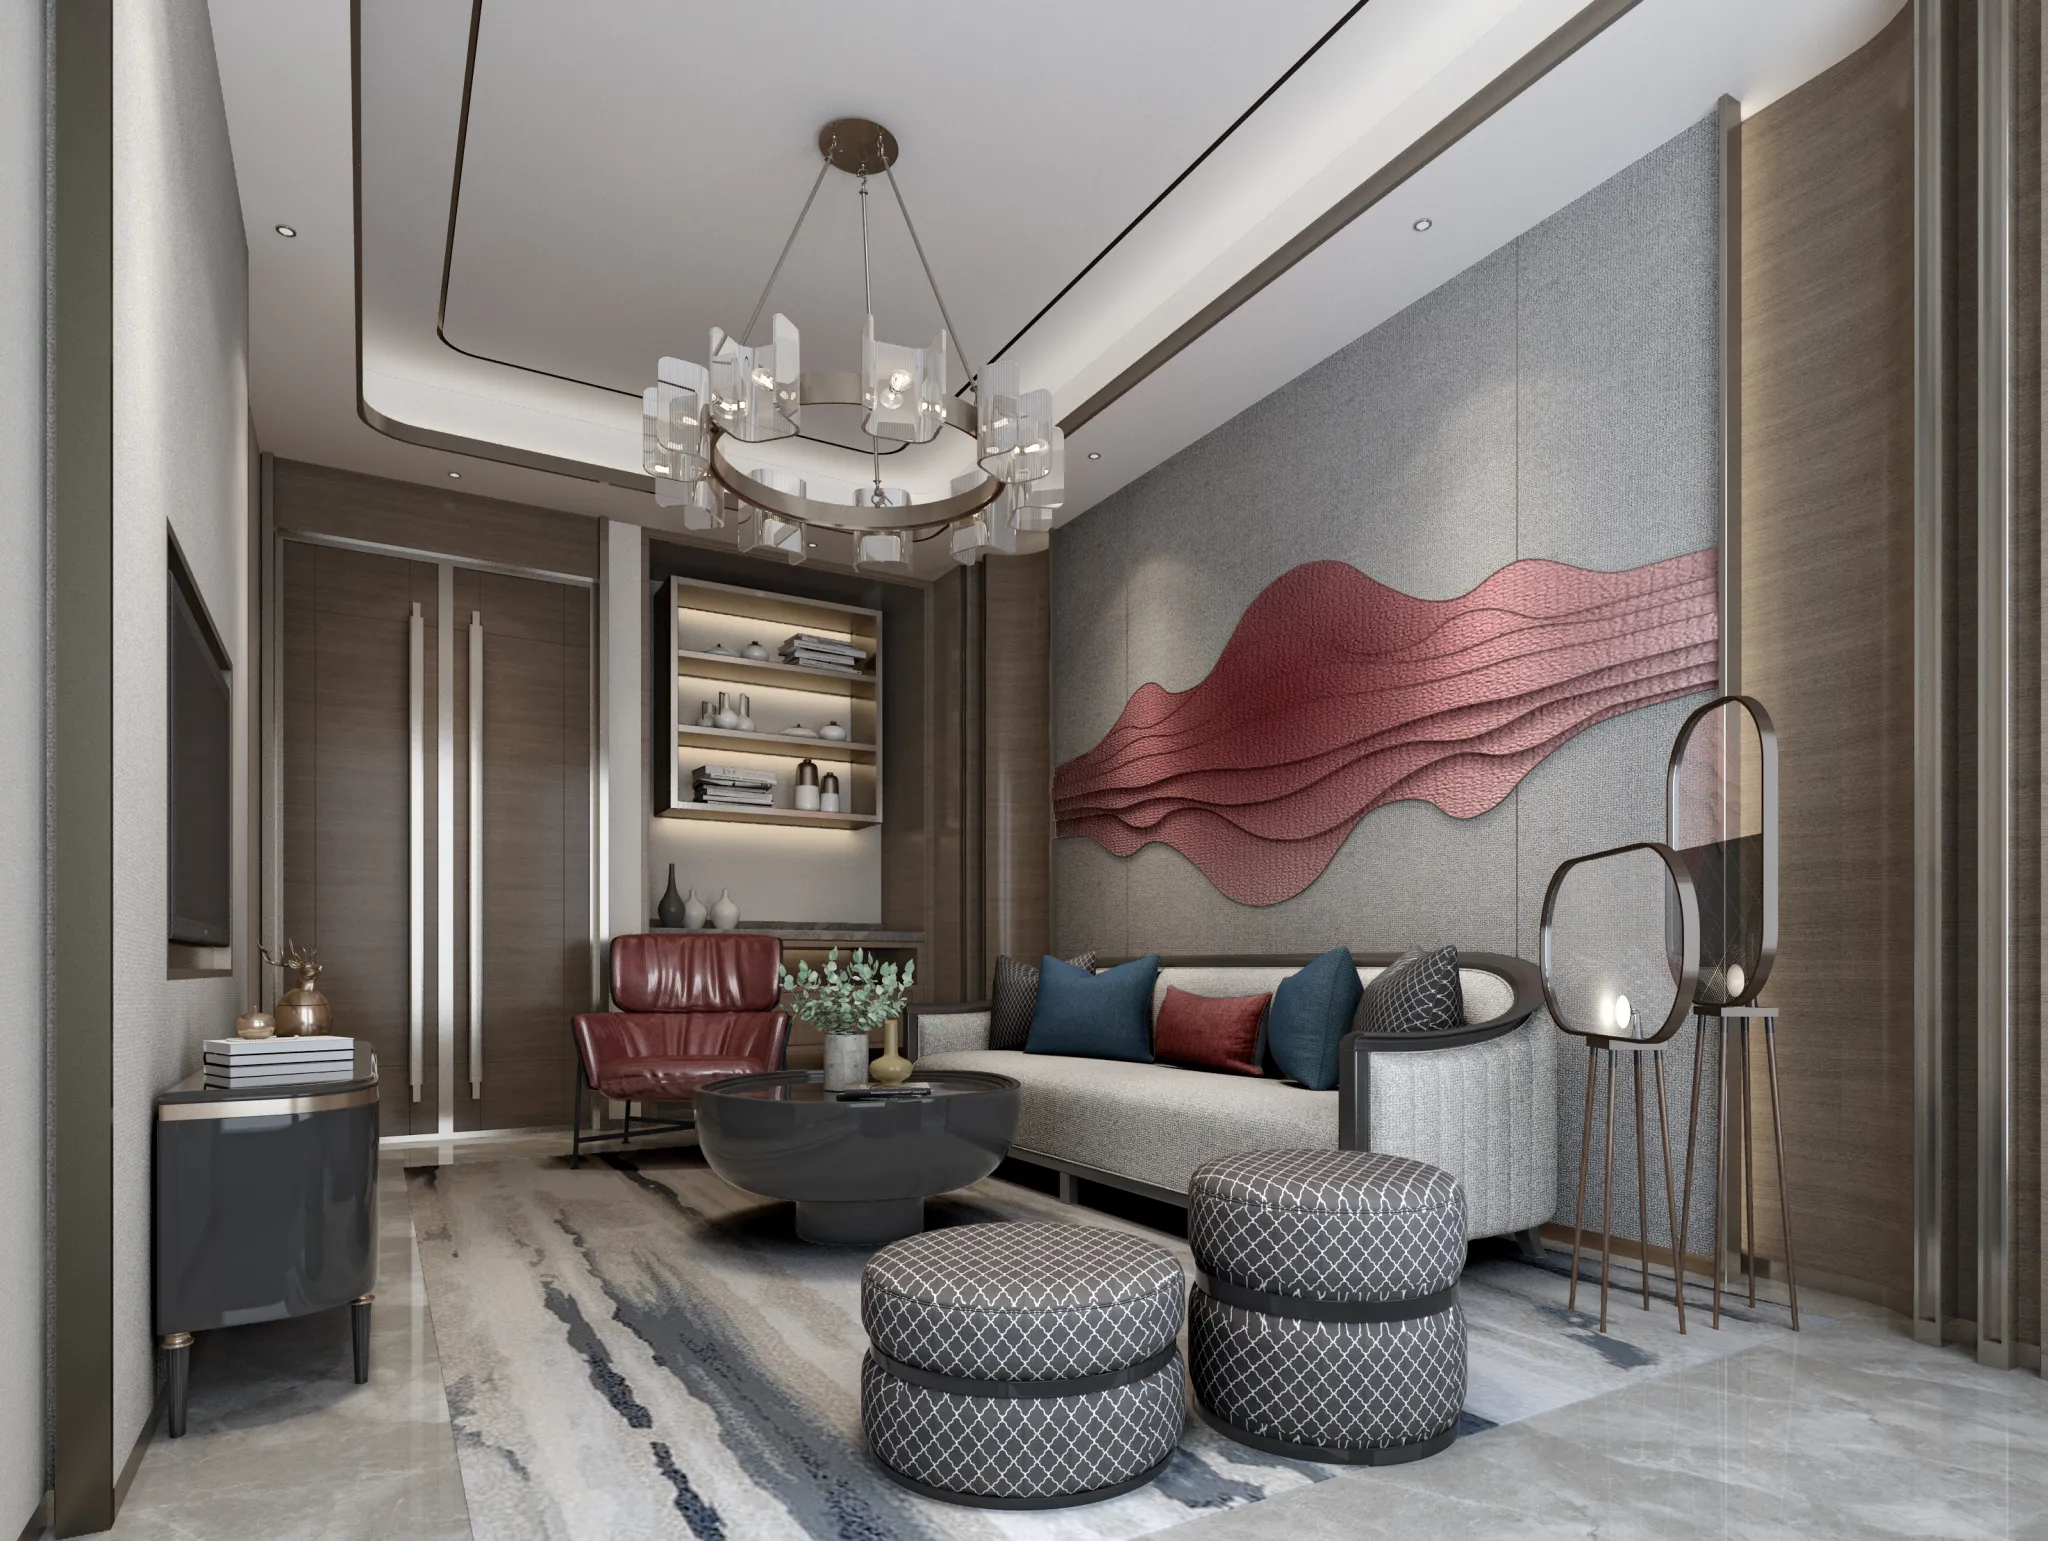 DESMOD INTERIOR 2021 (VRAY) – 4. LIVING ROOM – CHINESE – 002